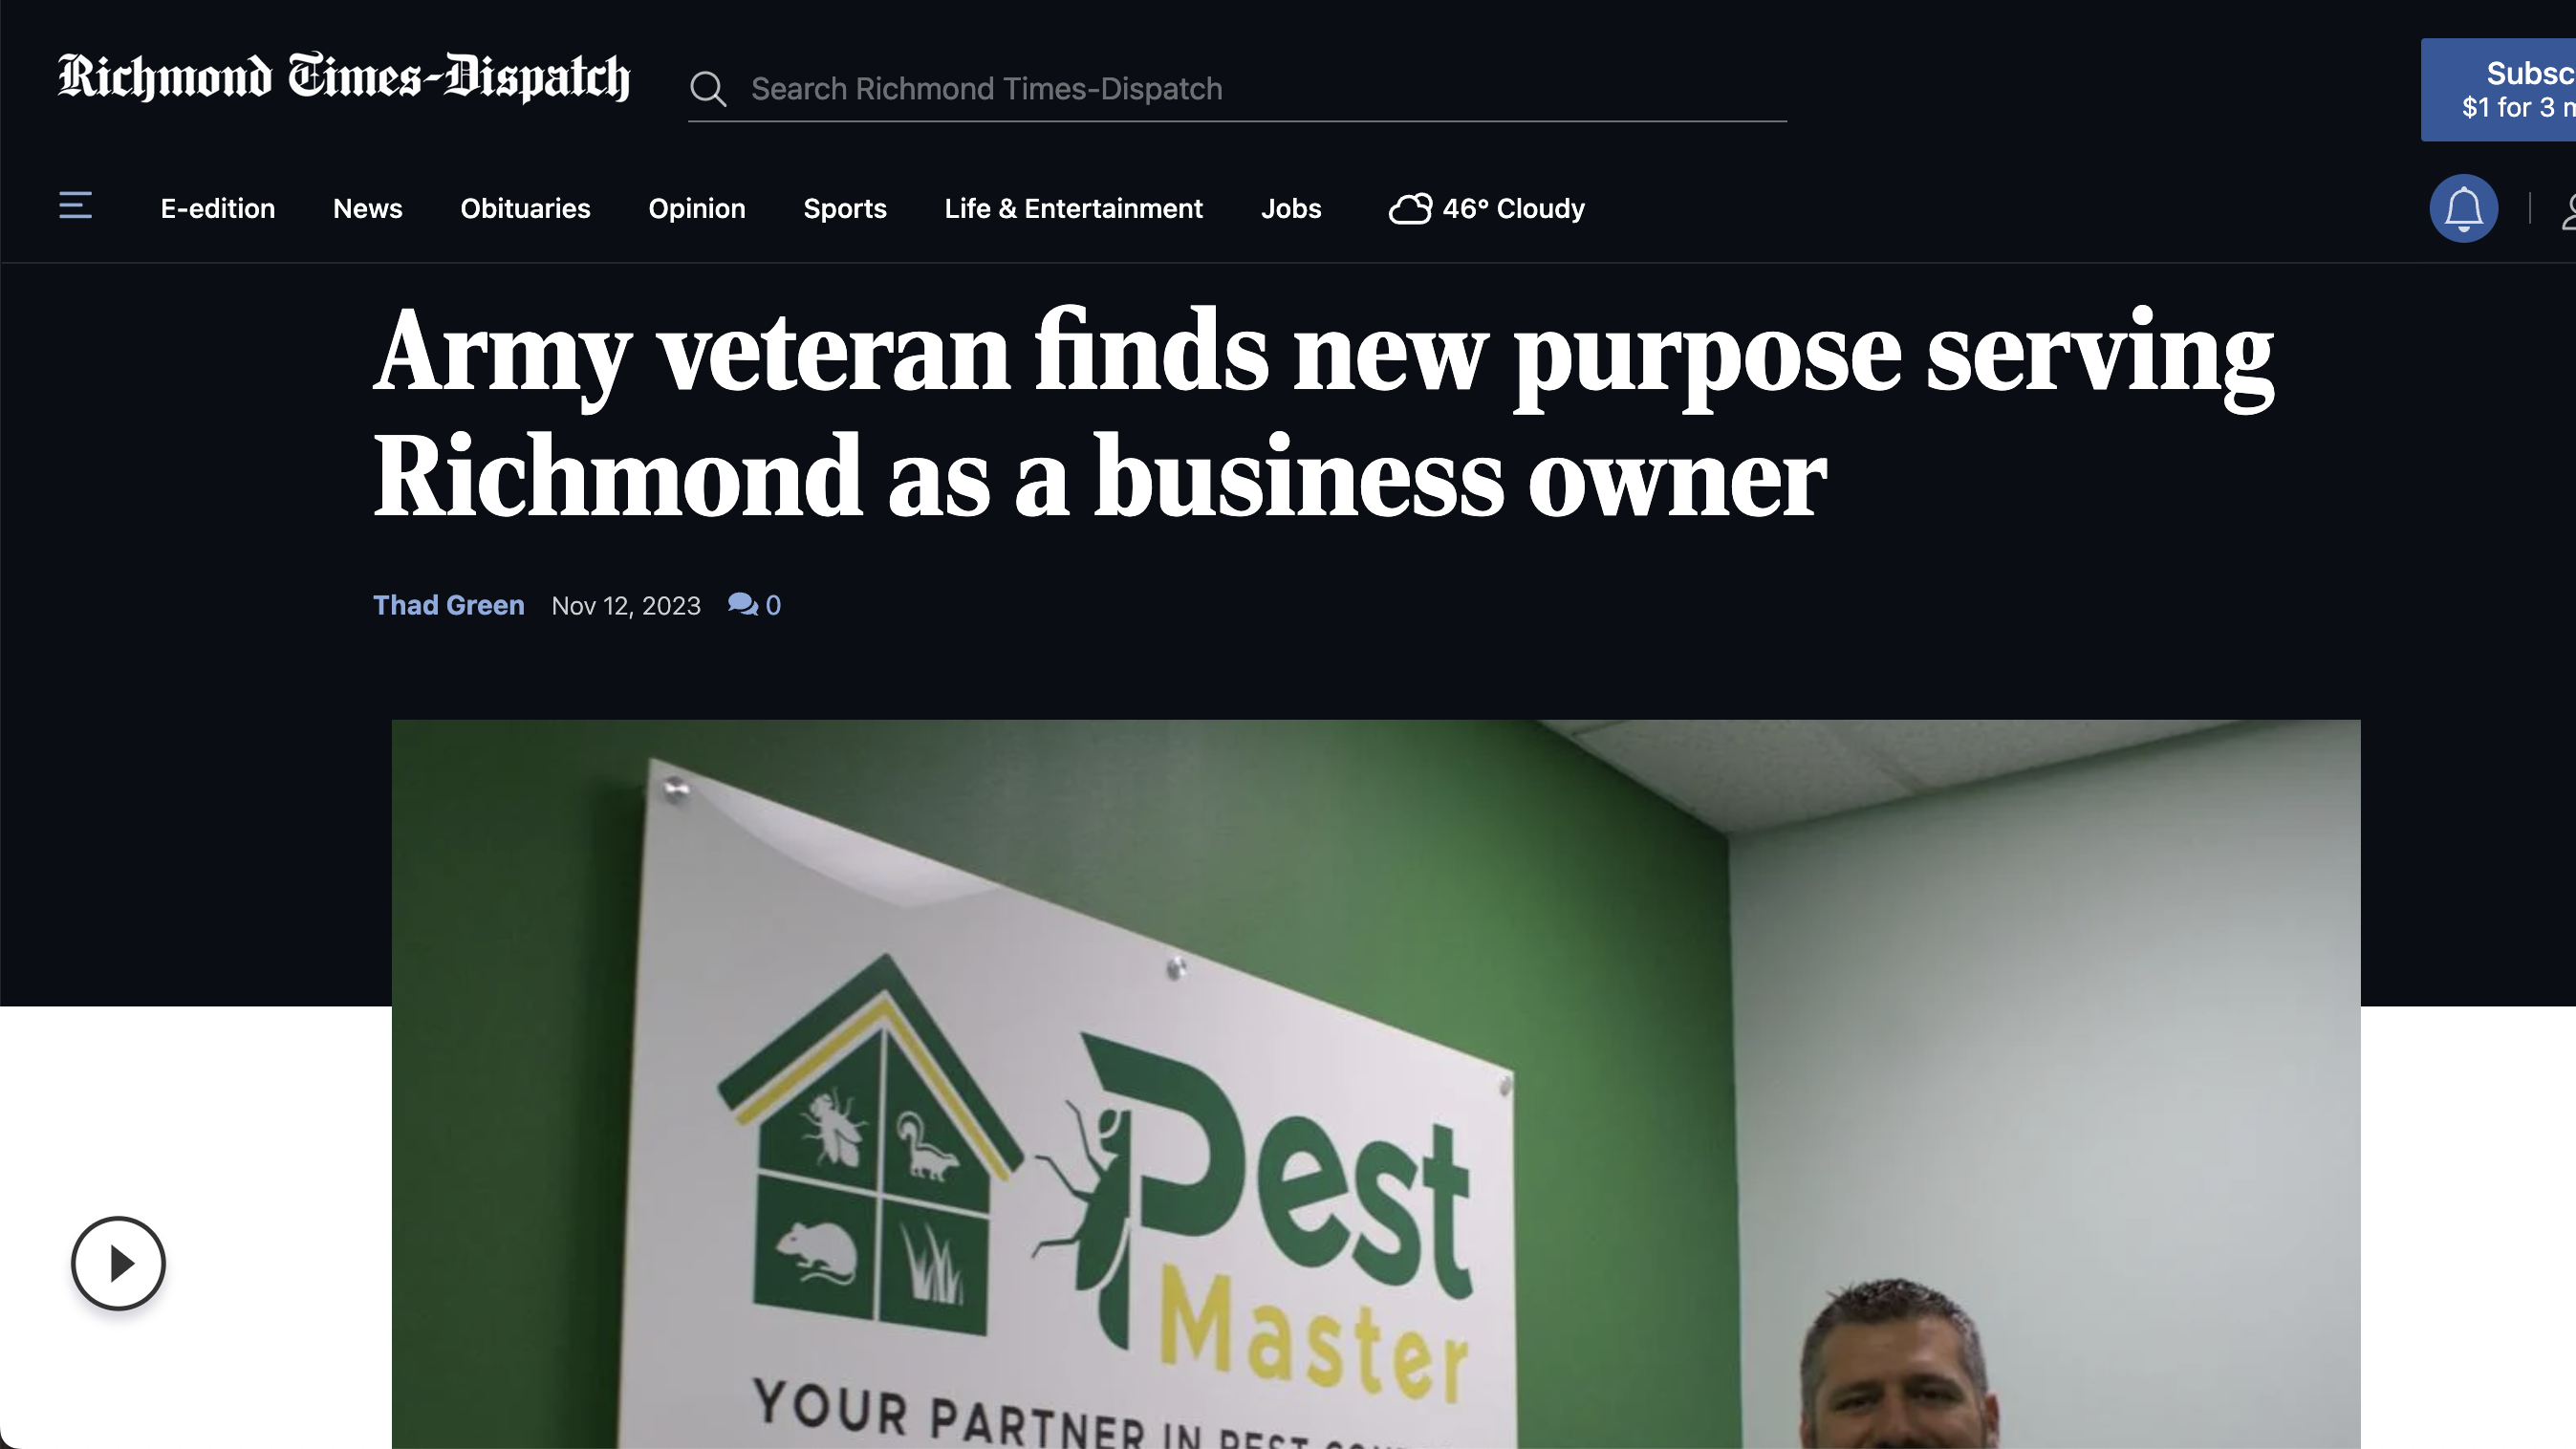 Army veteran finds new purpose serving Richmond as a business owner